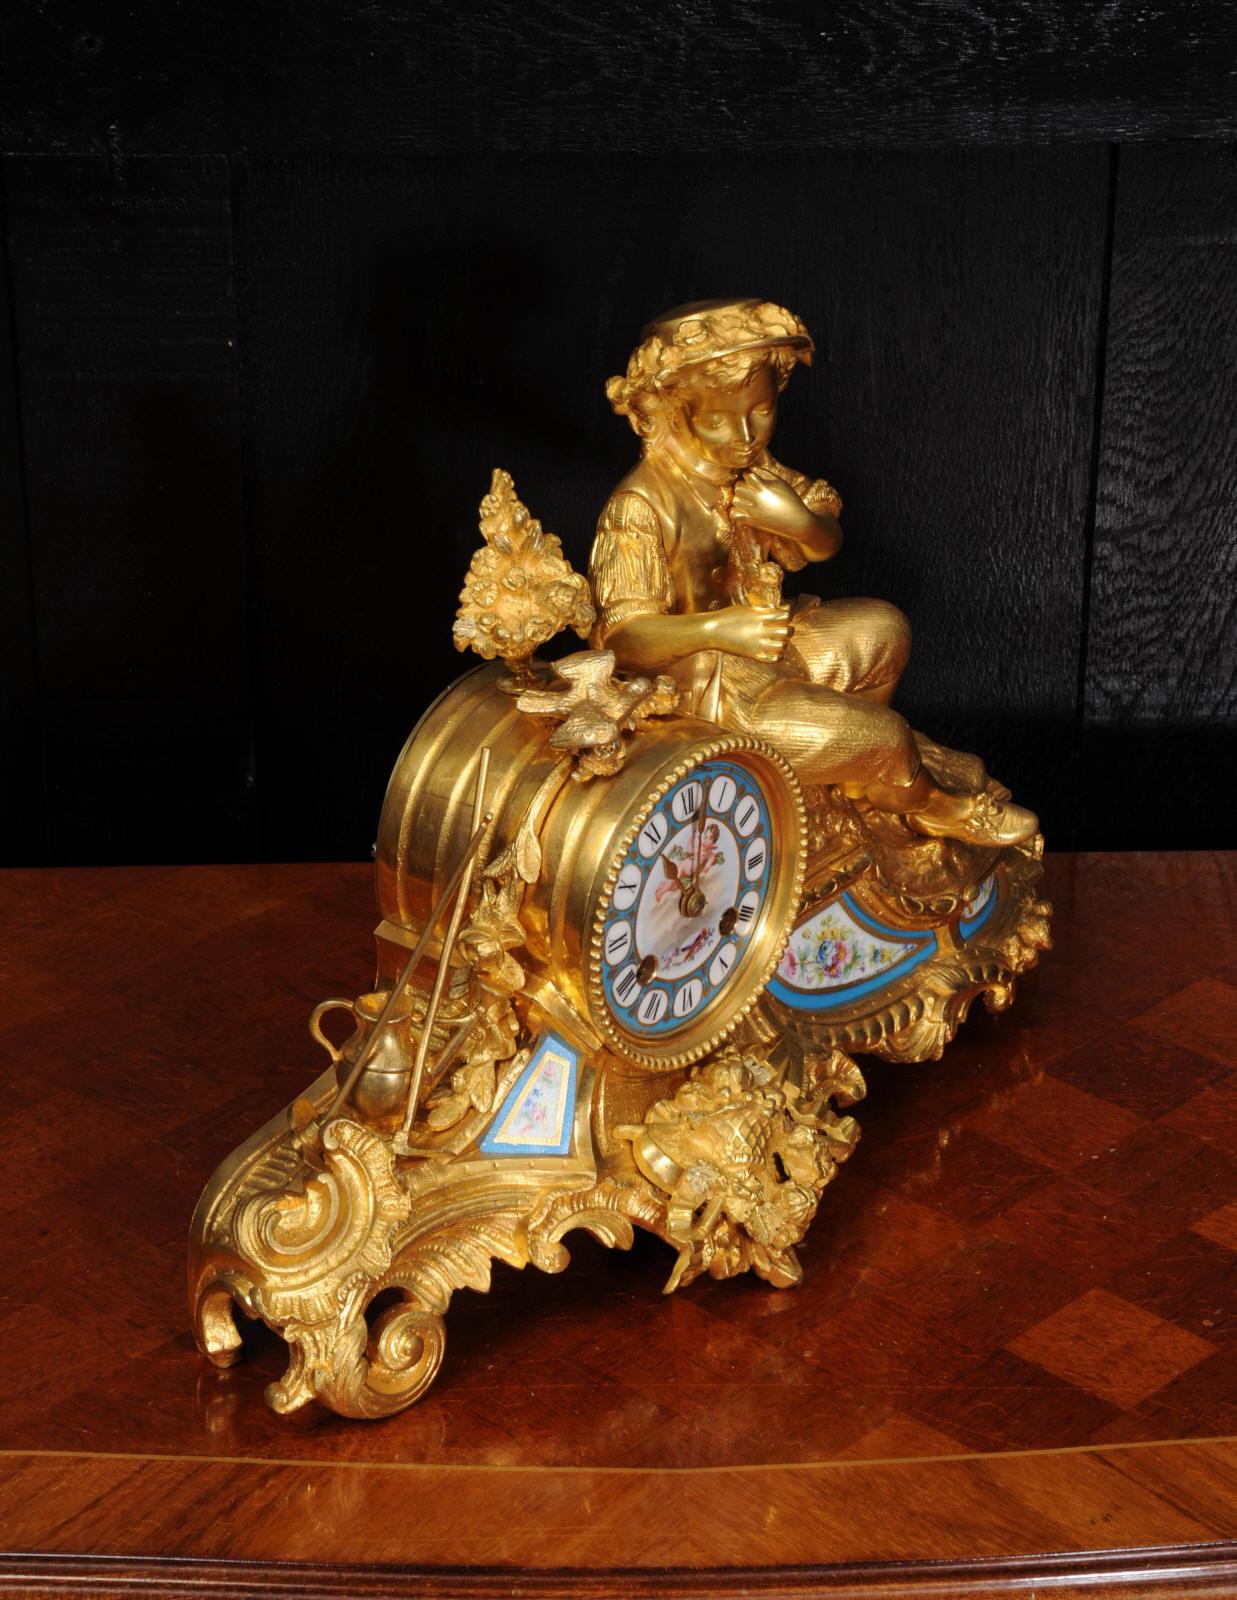 Baroque Japy Freres Ormolu and Sevres Porcelain Clock, the Gardener, Antique French 1860